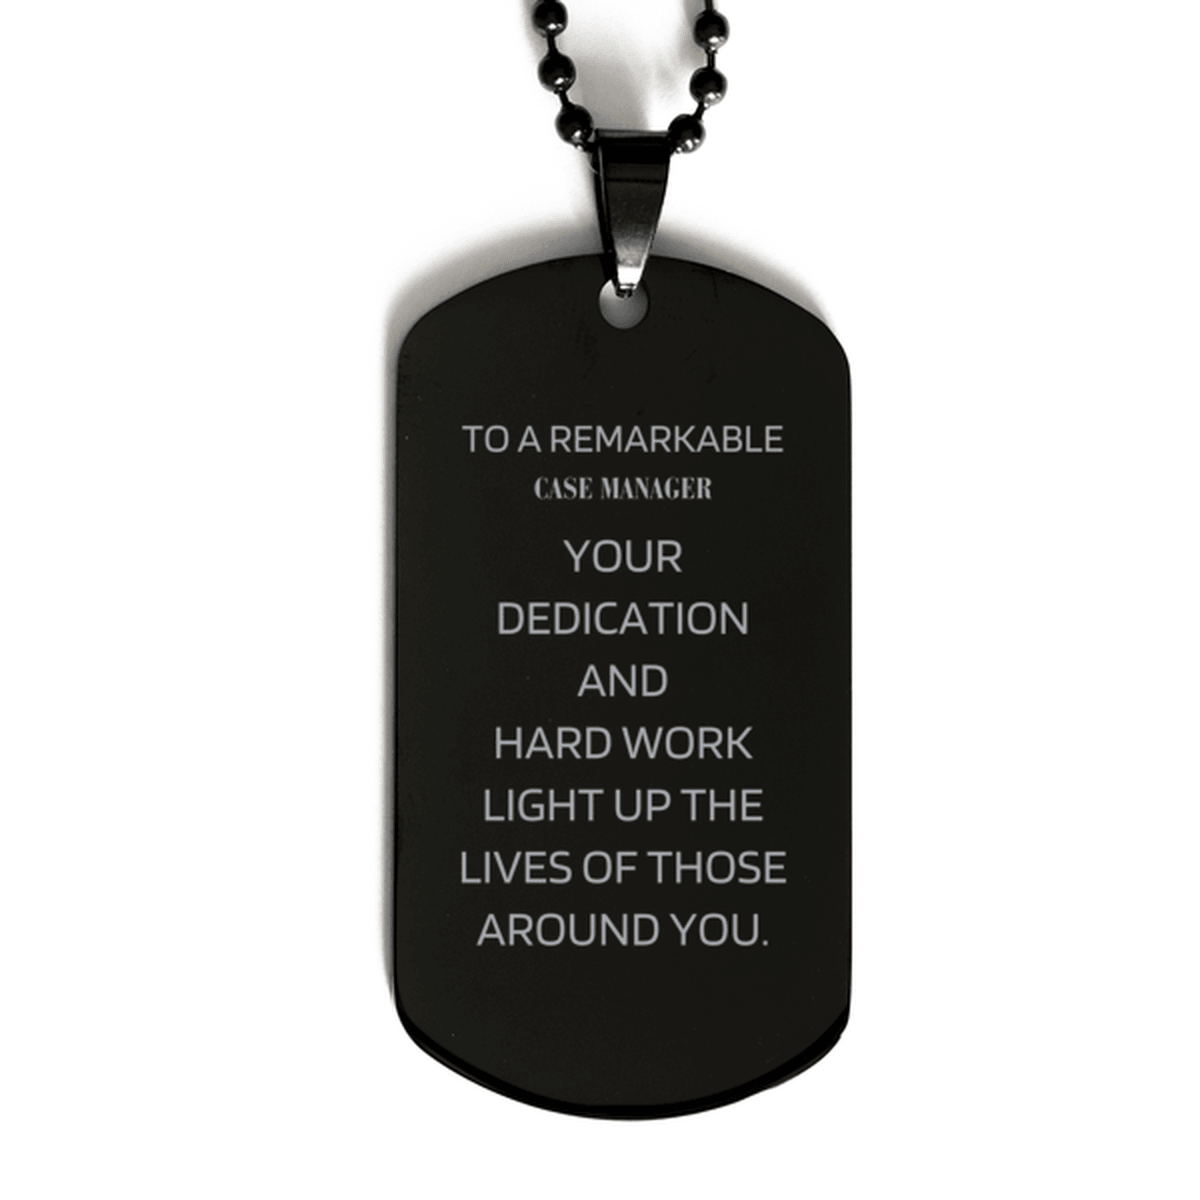 Remarkable Case Manager Gifts, Your dedication and hard work, Inspirational Birthday Christmas Unique Black Dog Tag For Case Manager, Coworkers, Men, Women, Friends - Mallard Moon Gift Shop